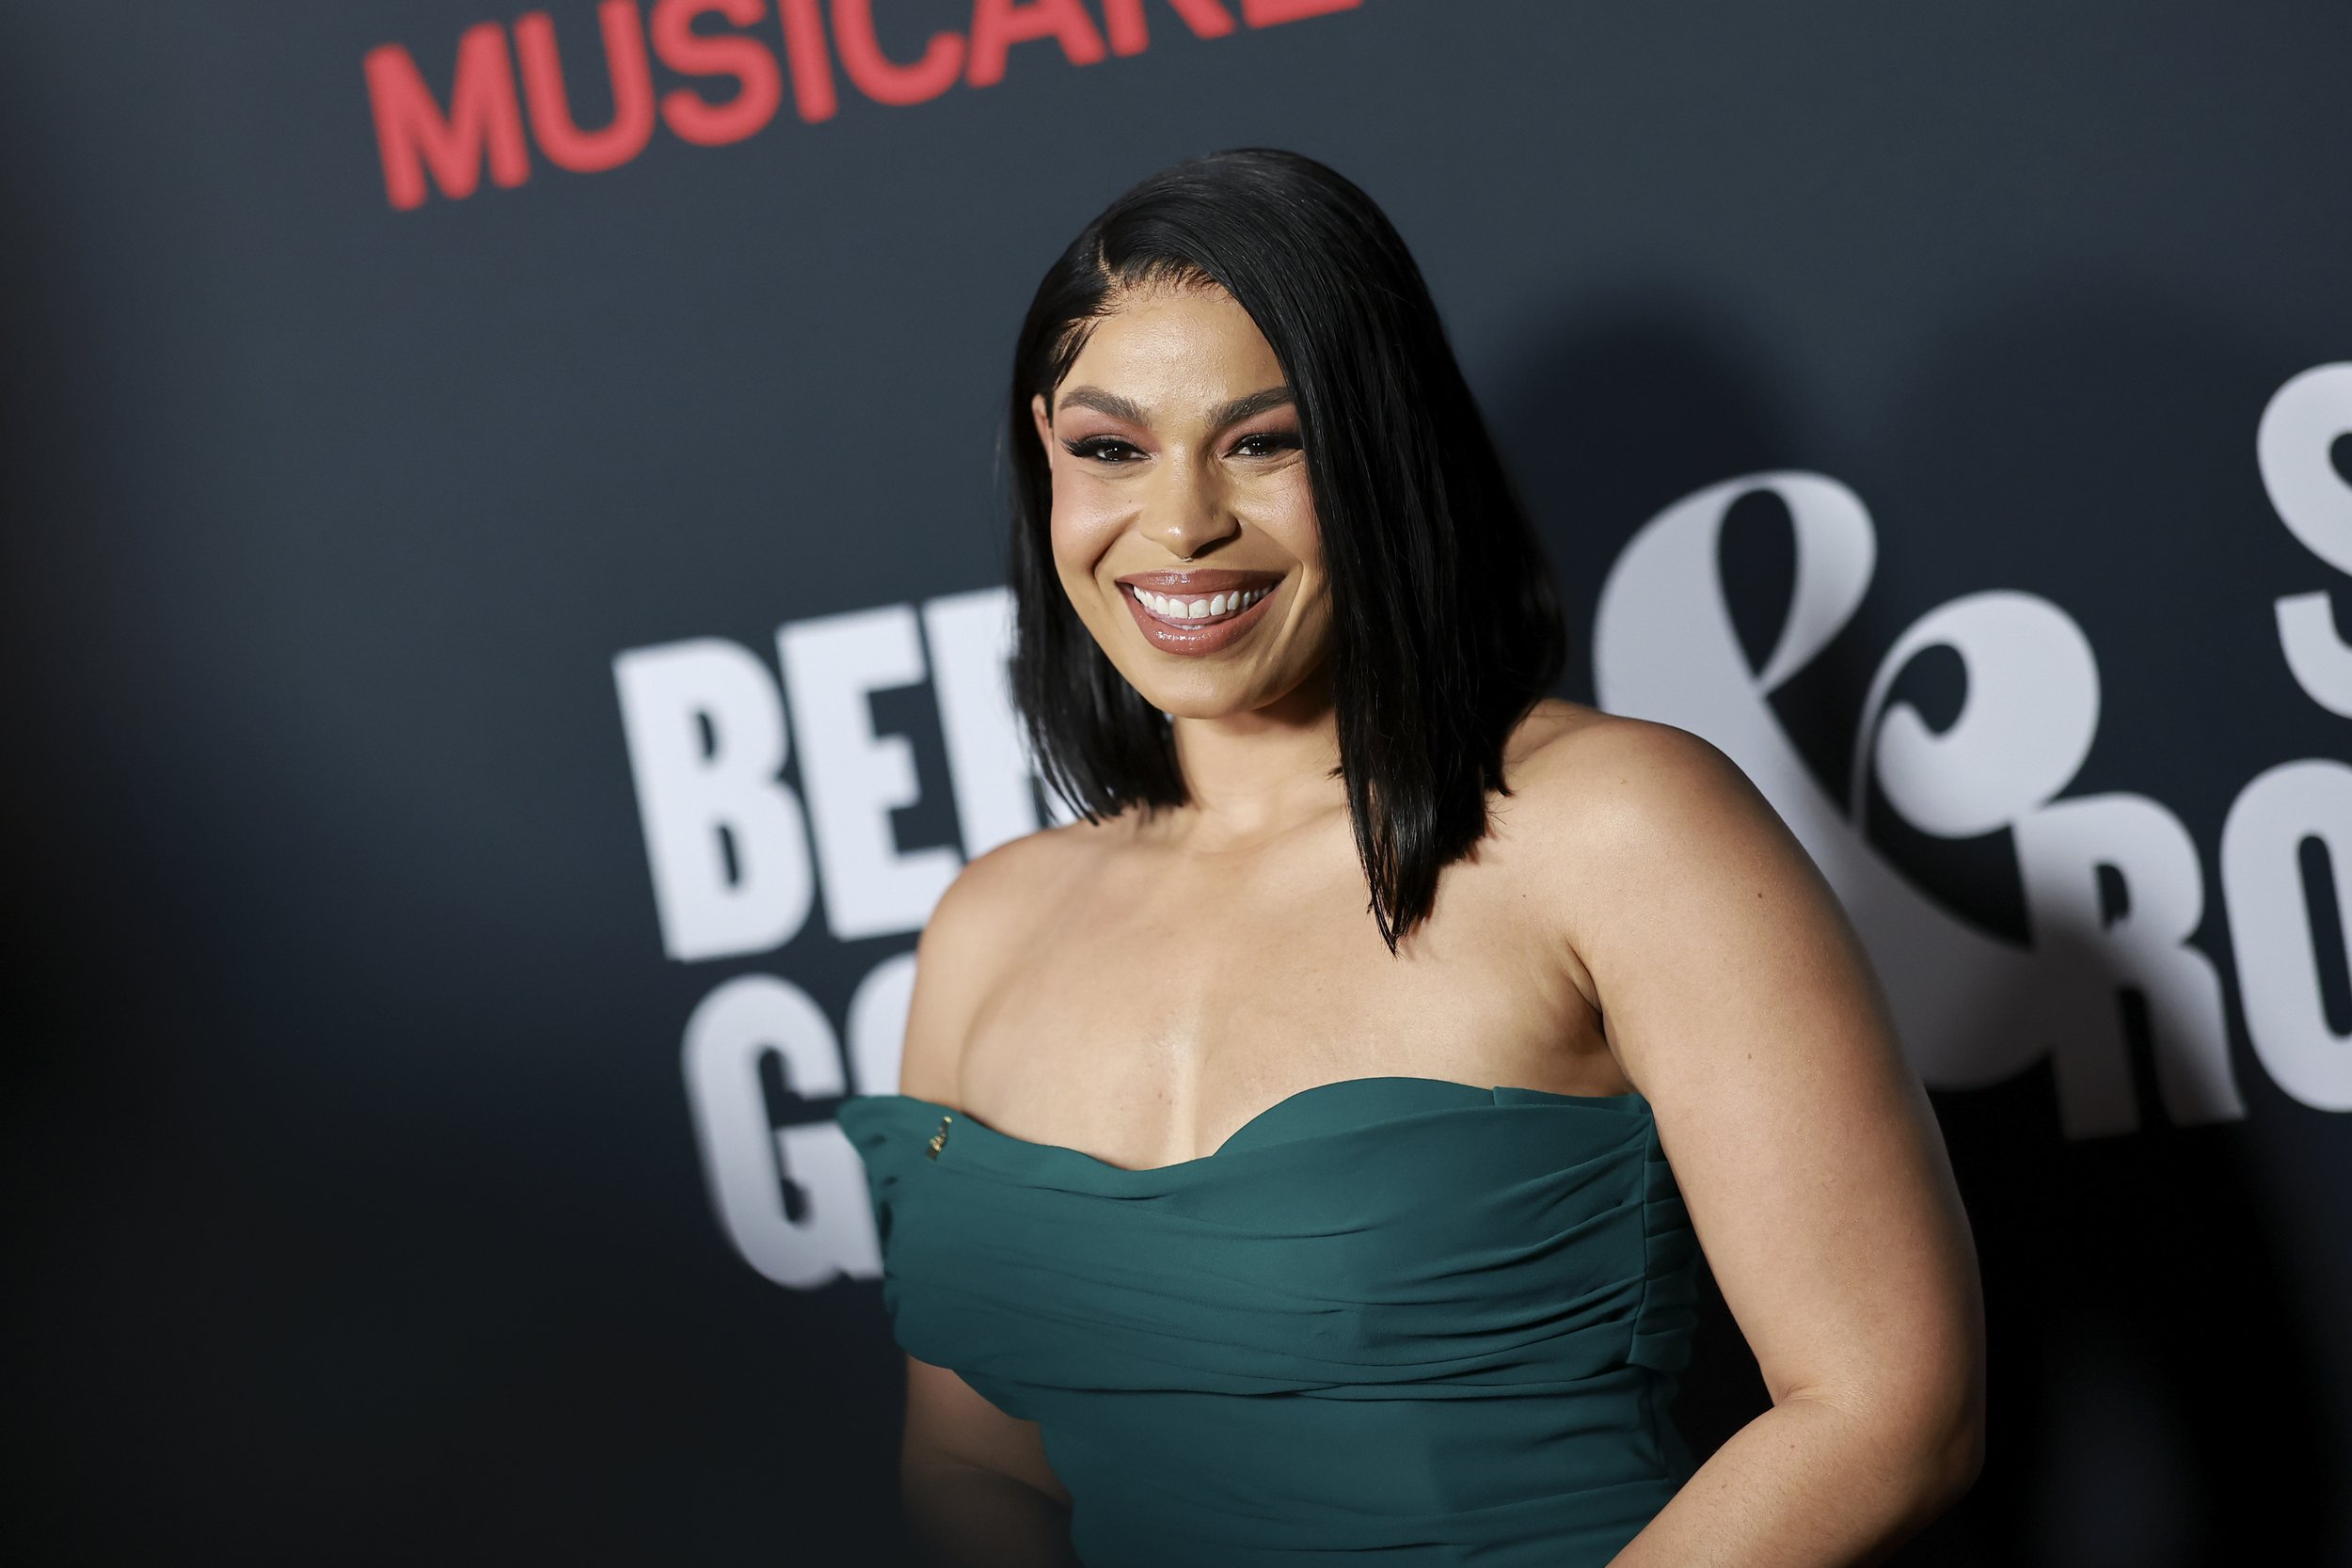  LOS ANGELES, CALIFORNIA - FEBRUARY 03: Jordin Sparks attends MusiCares Persons of the Year Honoring Berry Gordy and Smokey Robinson at Los Angeles Convention Center on February 03, 2023 in Los Angeles, California. (Photo by Matt Winkelmeyer/Getty Im